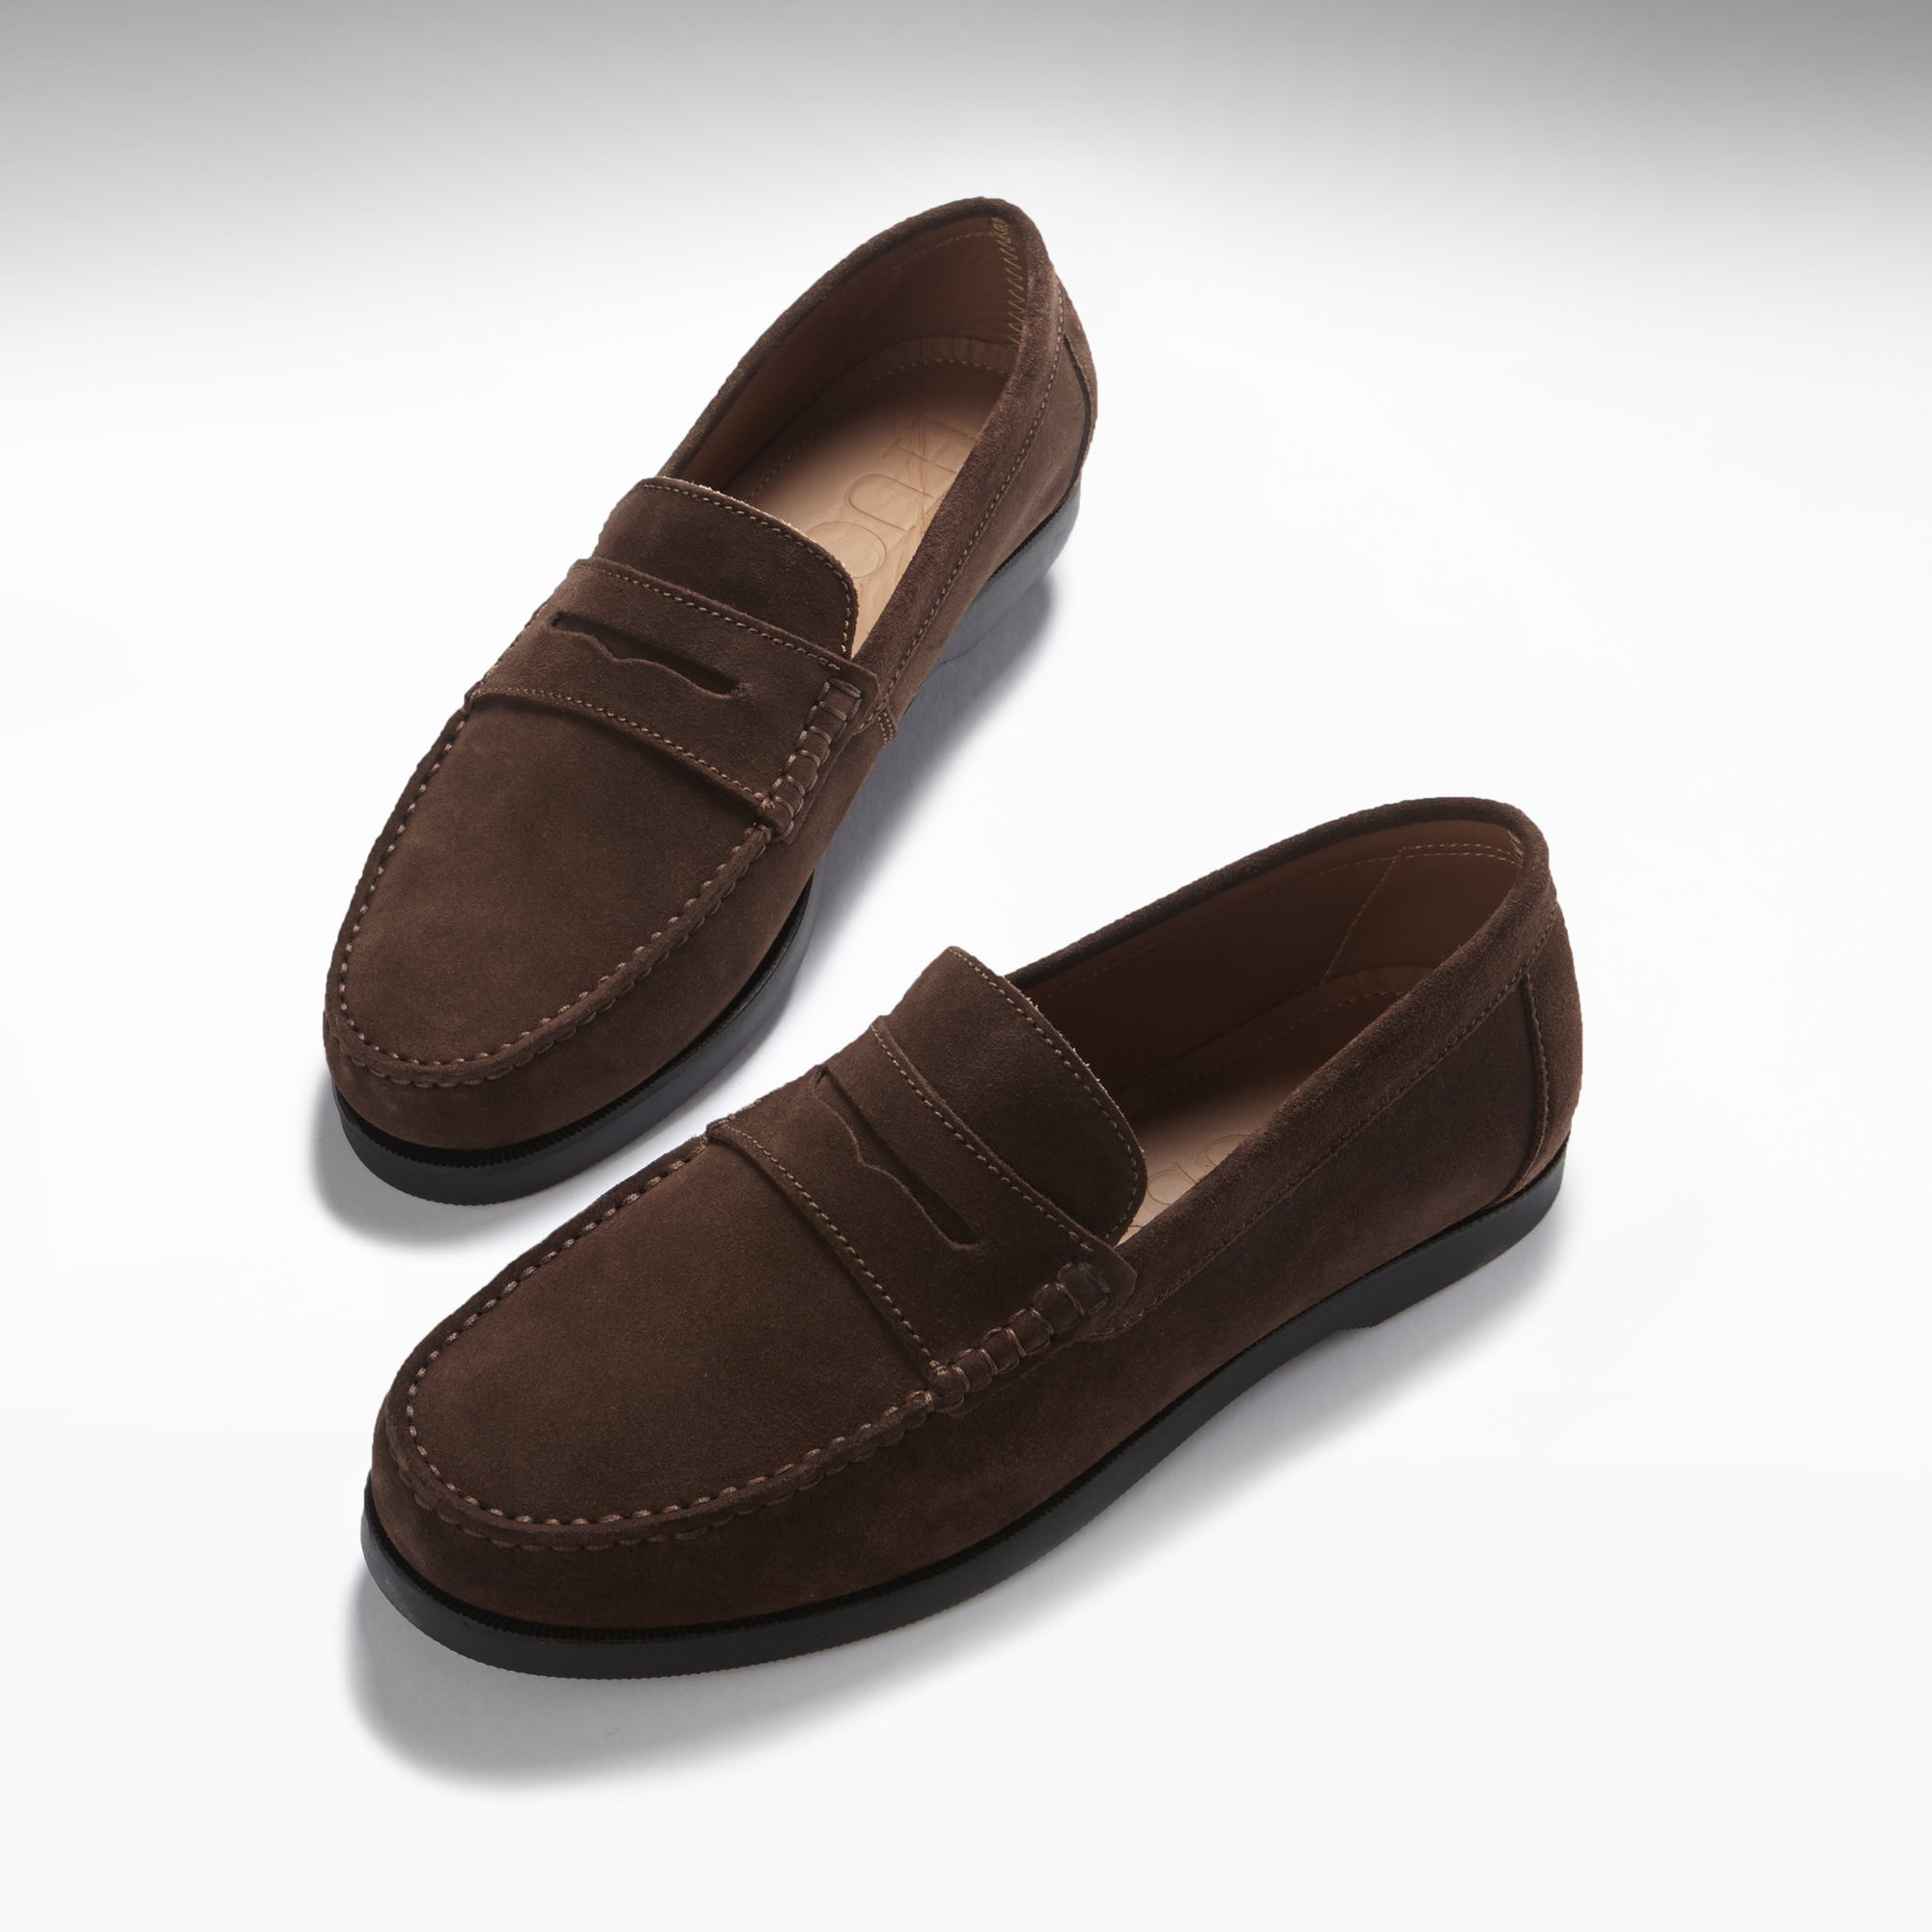 Boat Loafers, brown suede